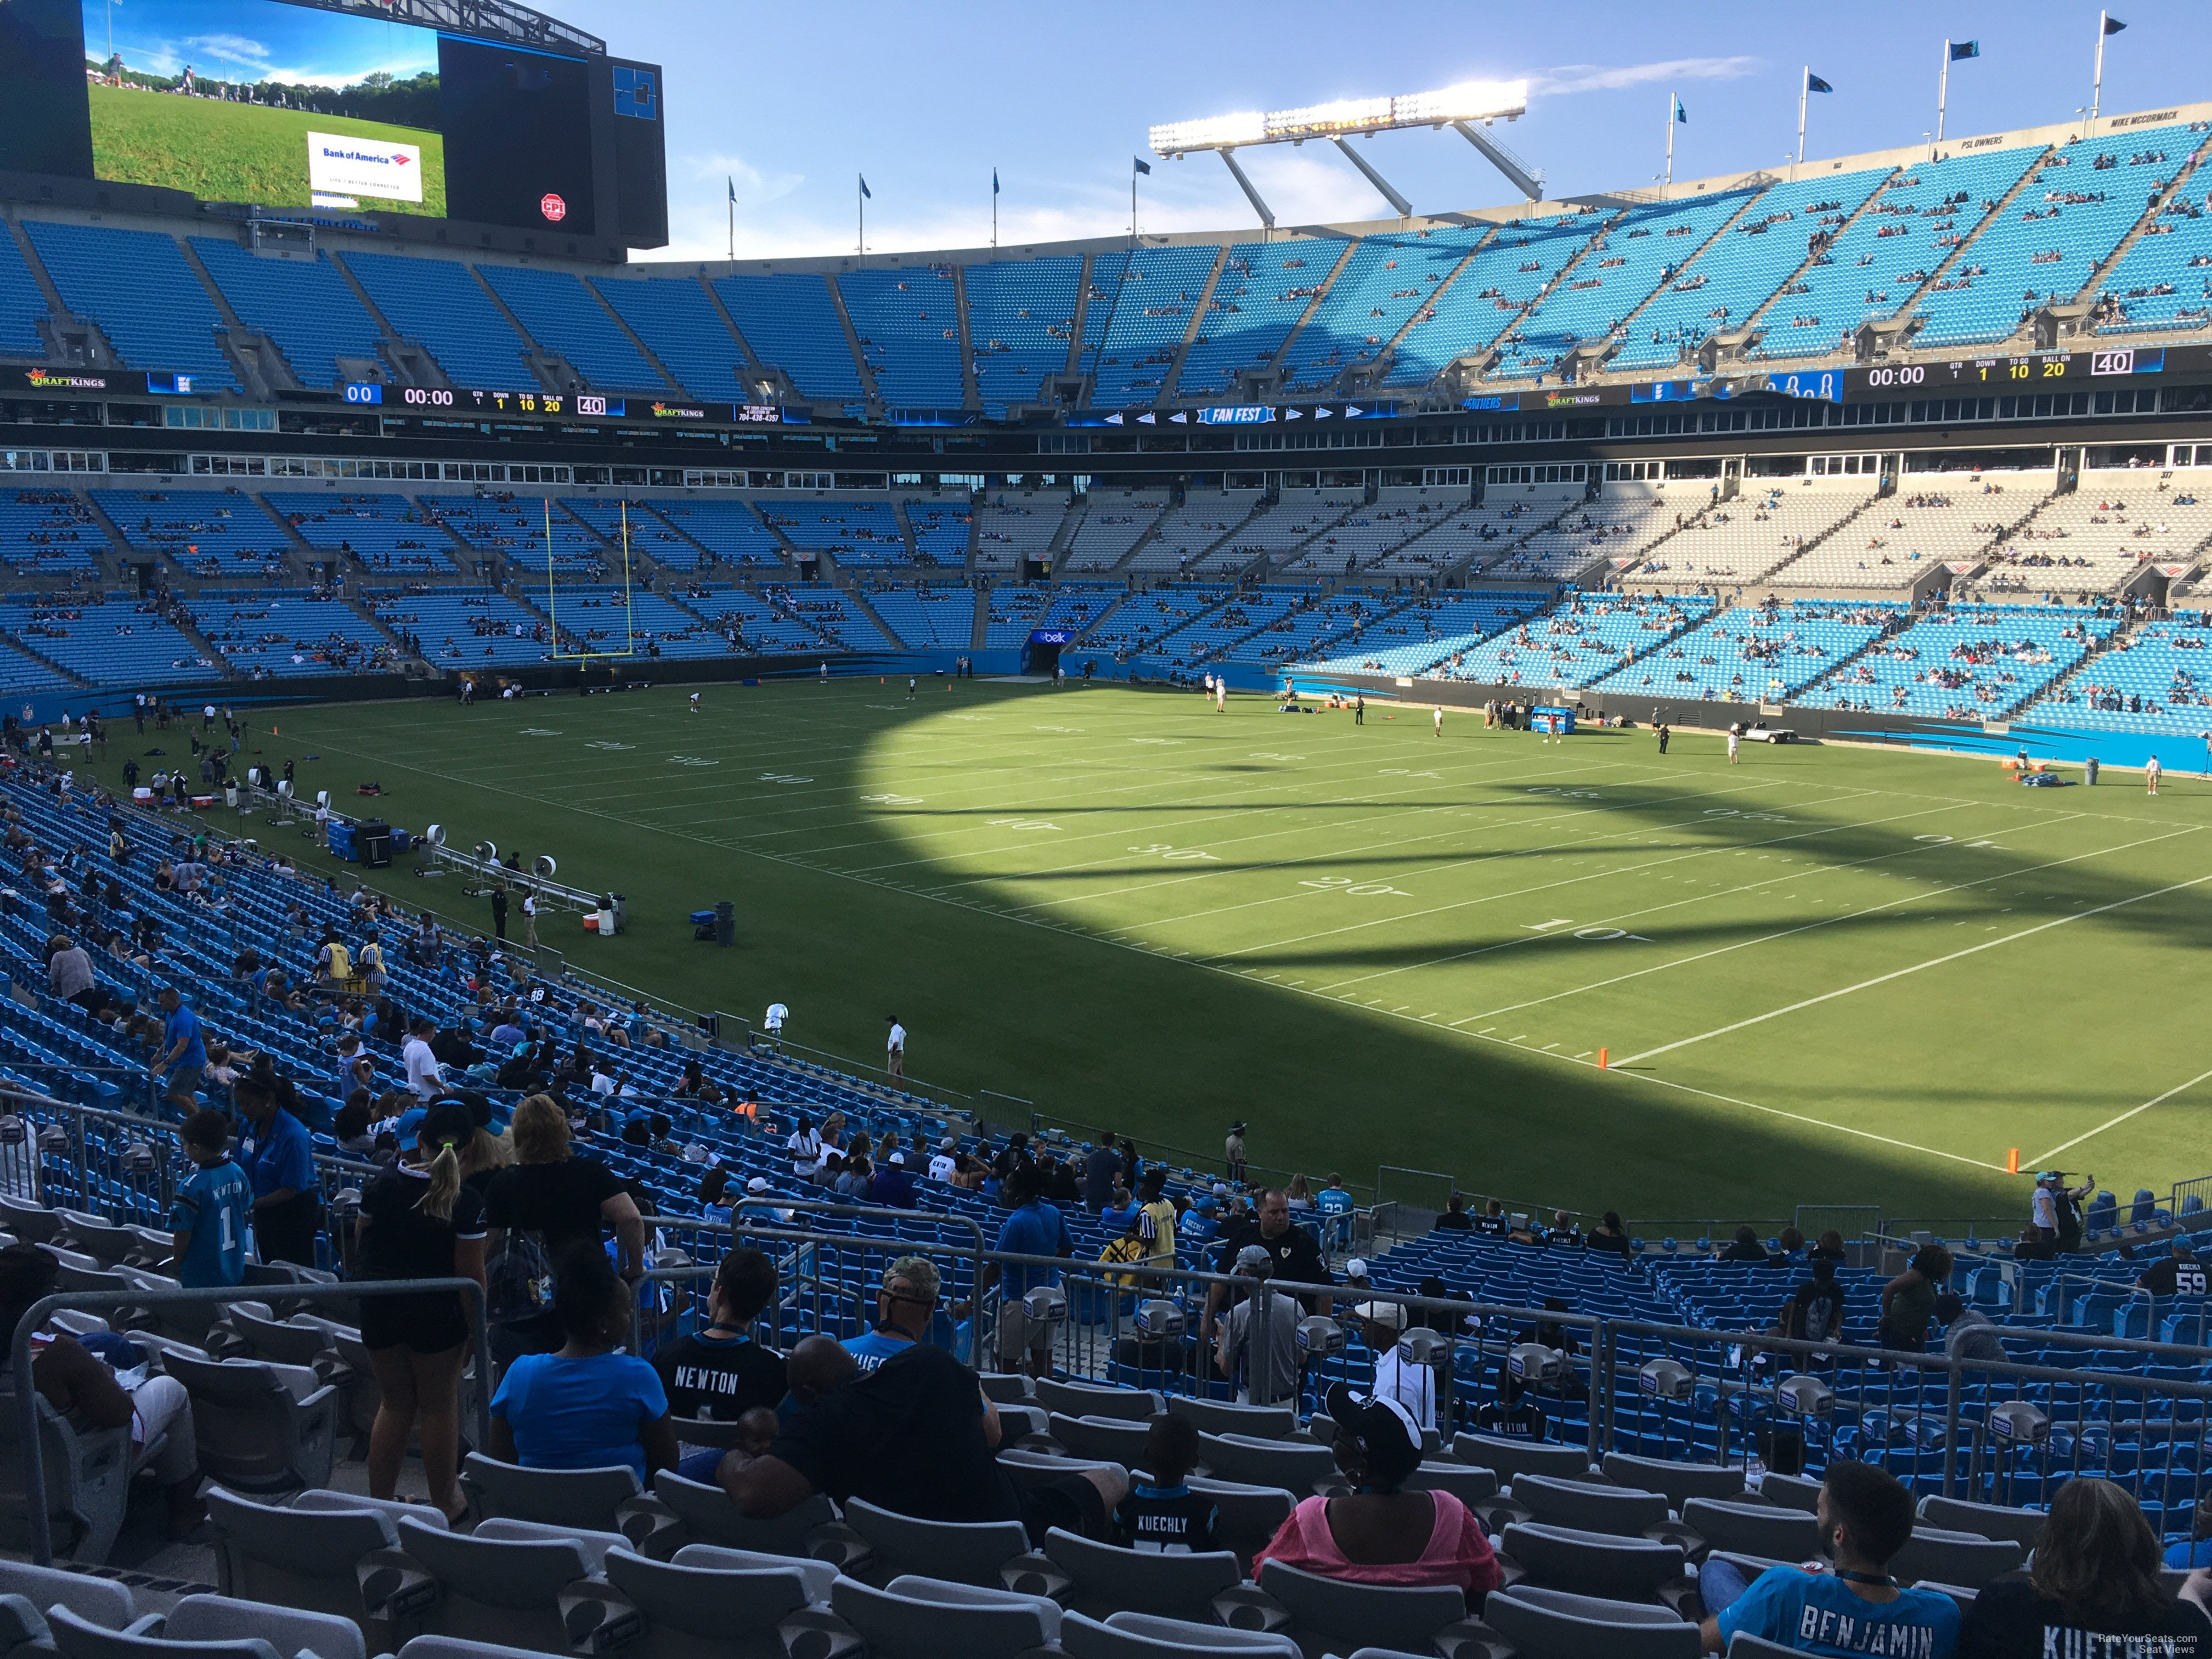 section 337, row 10 seat view  for football - bank of america stadium